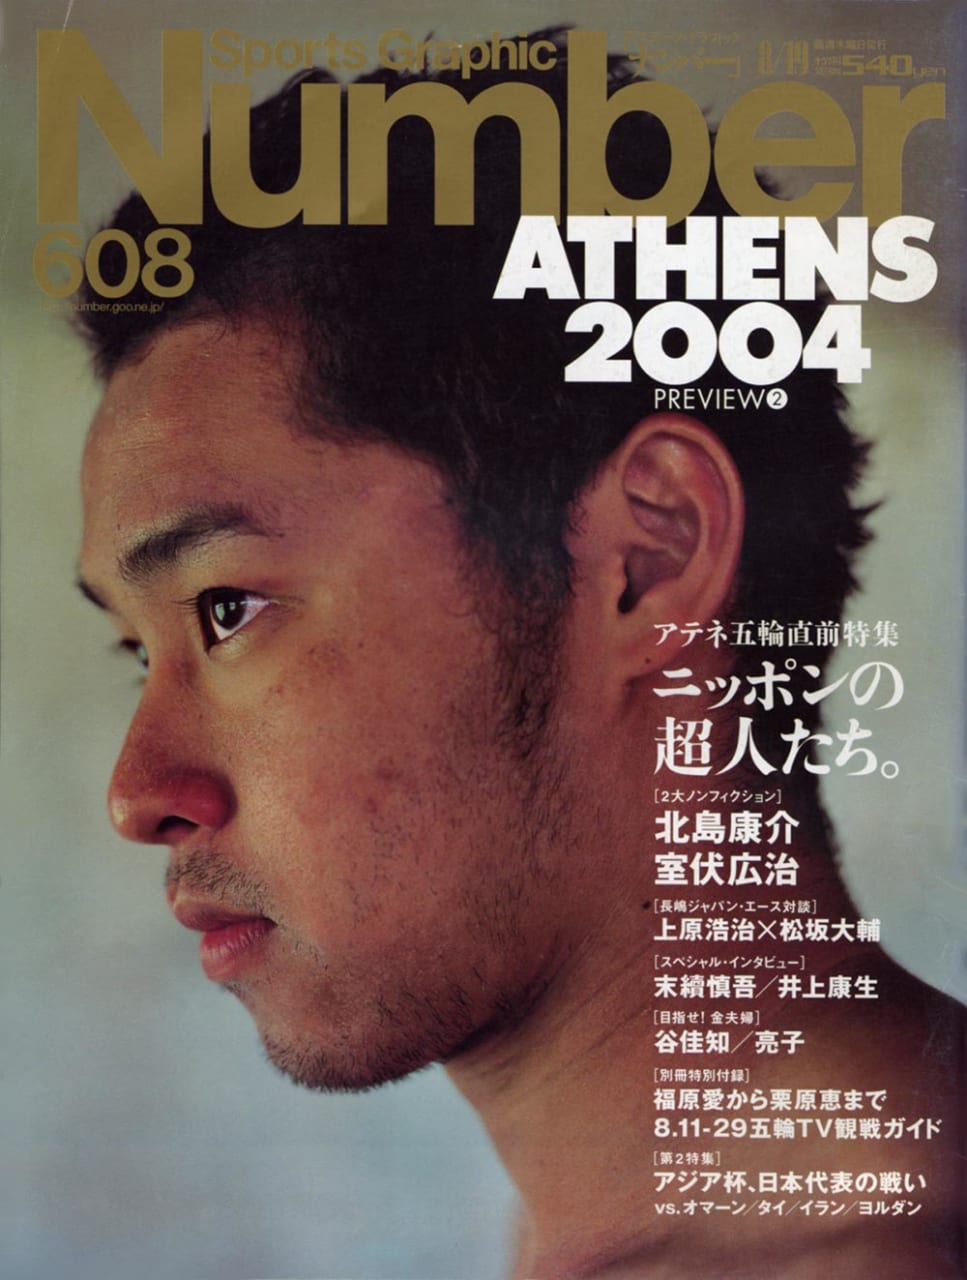 Sports Graphic Number 608号
2004年8月5日発売
表紙撮影：渞忠之